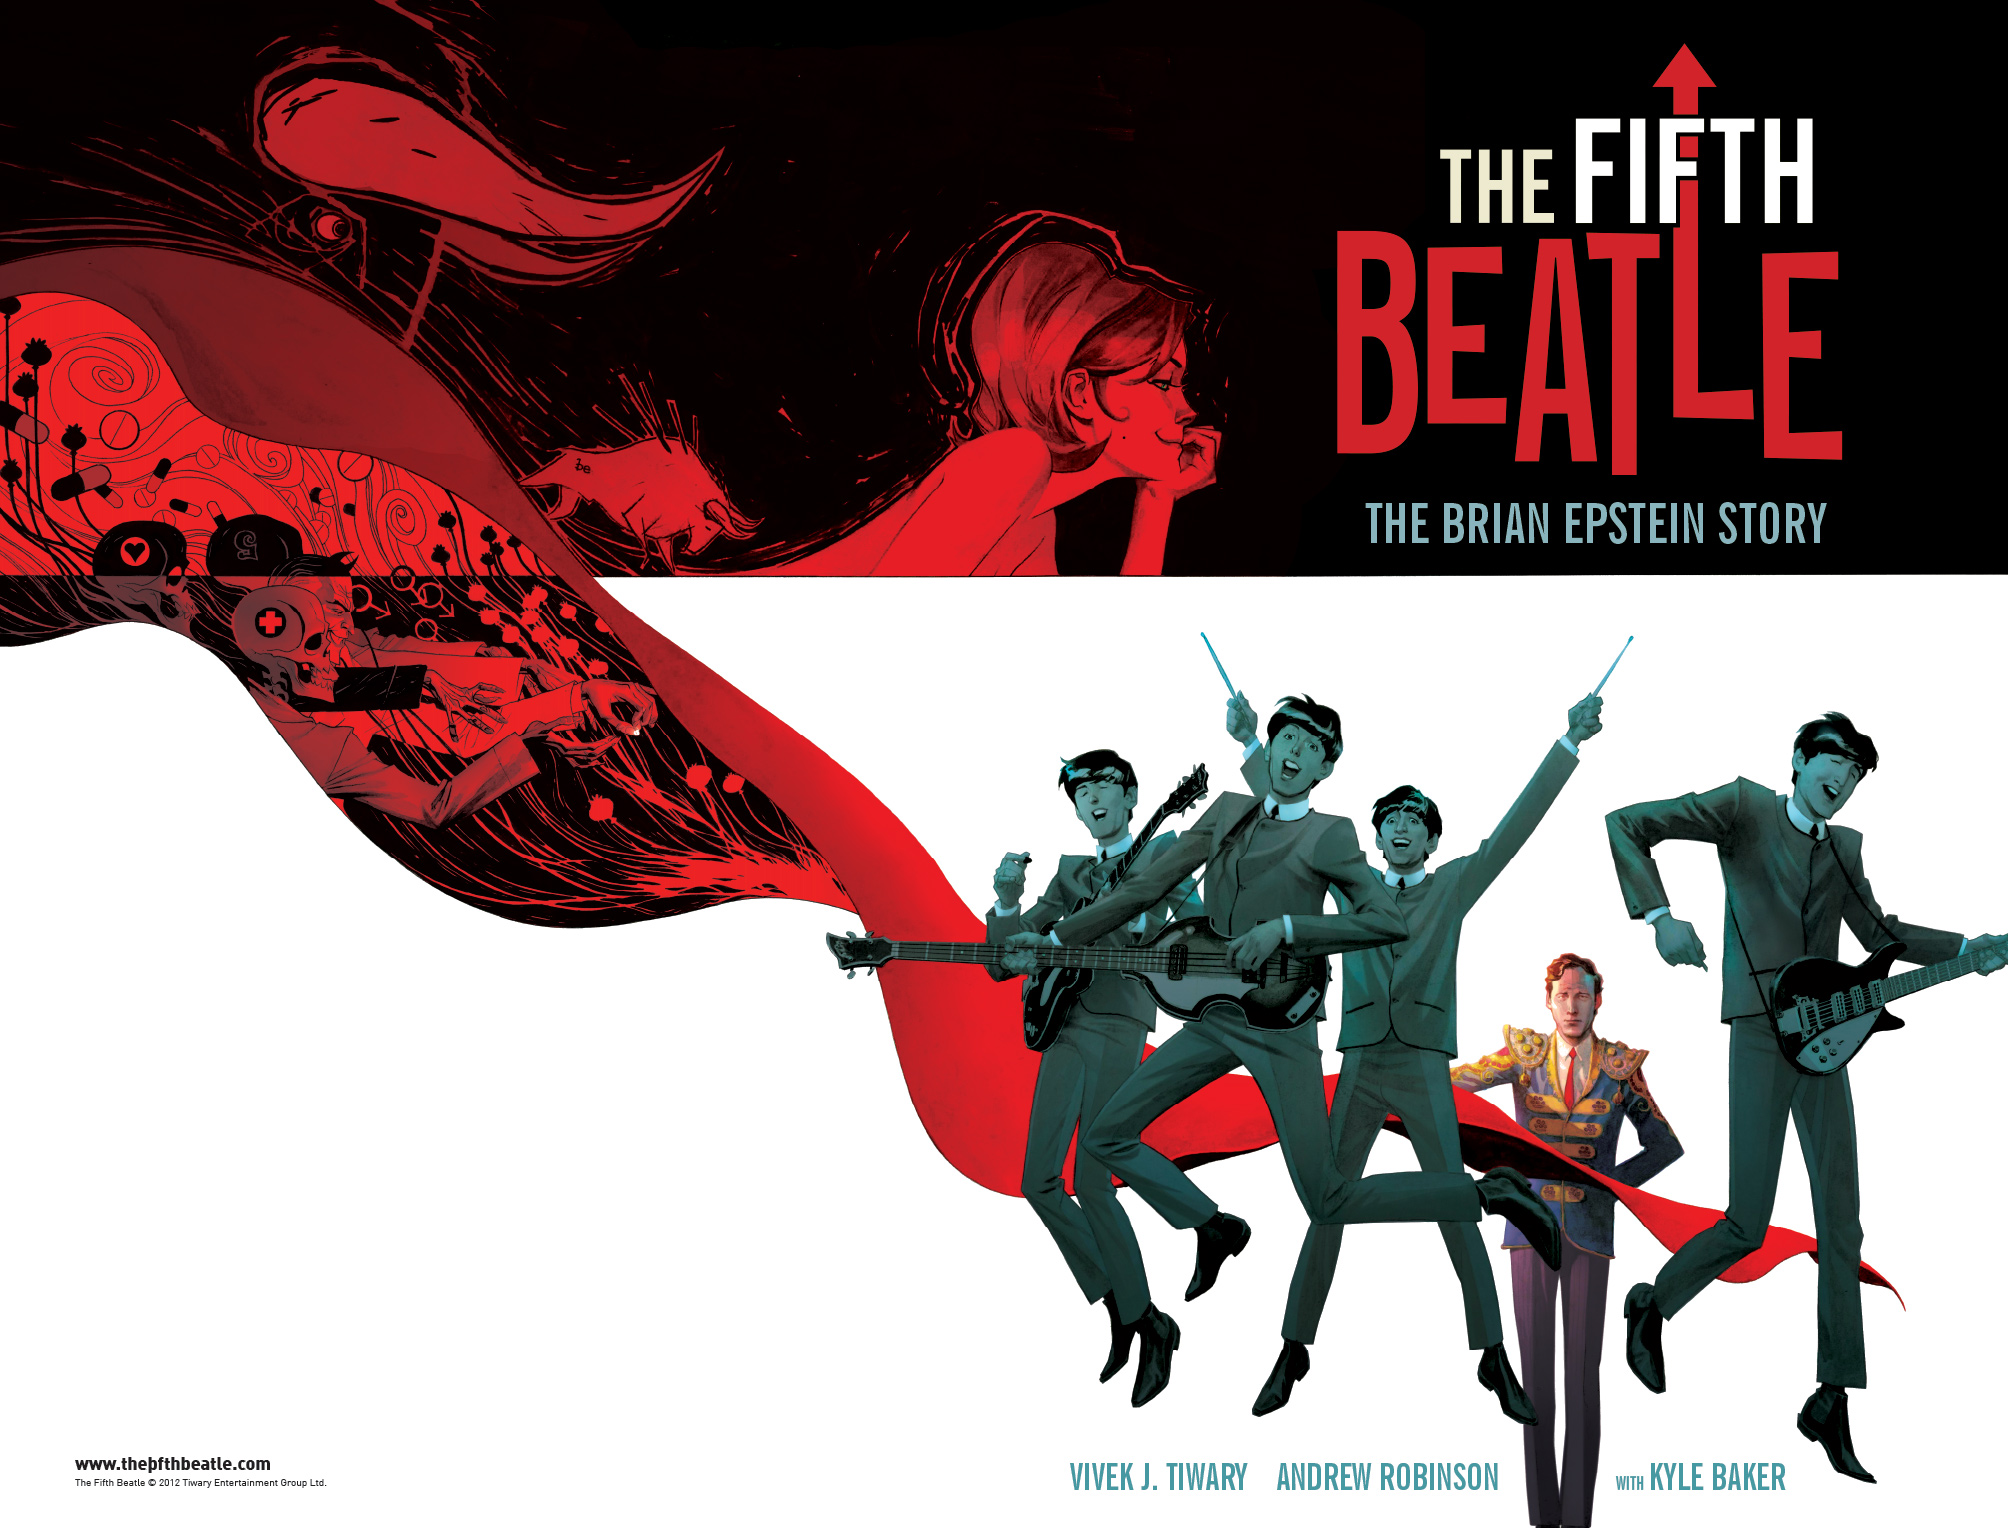 The-Fifth-Beatle-©-2012-Tiwary-Entertainment-Group-Ltd.